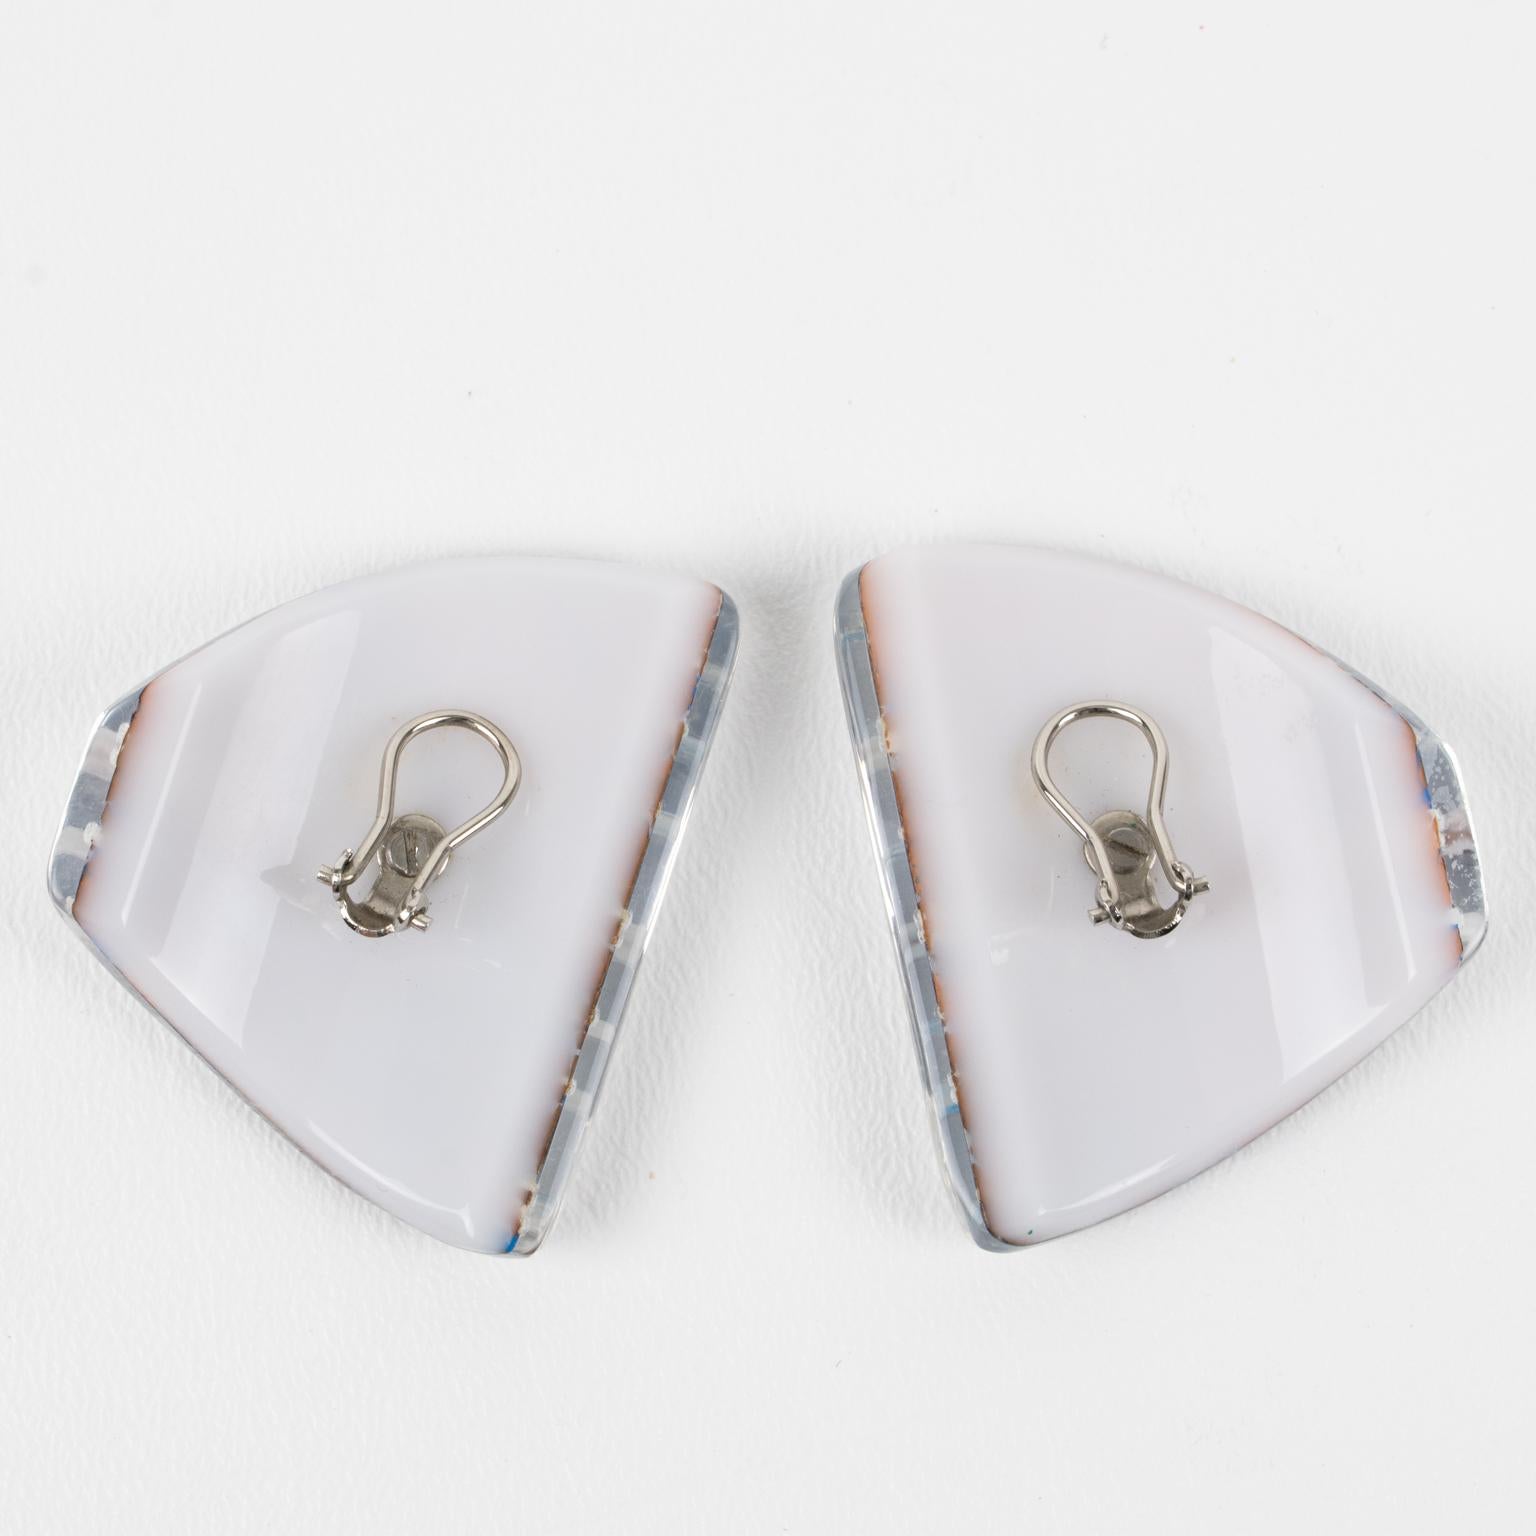 Anne and Frank Vigneri Lucite Clip Earrings with Silver Foil In Good Condition For Sale In Atlanta, GA